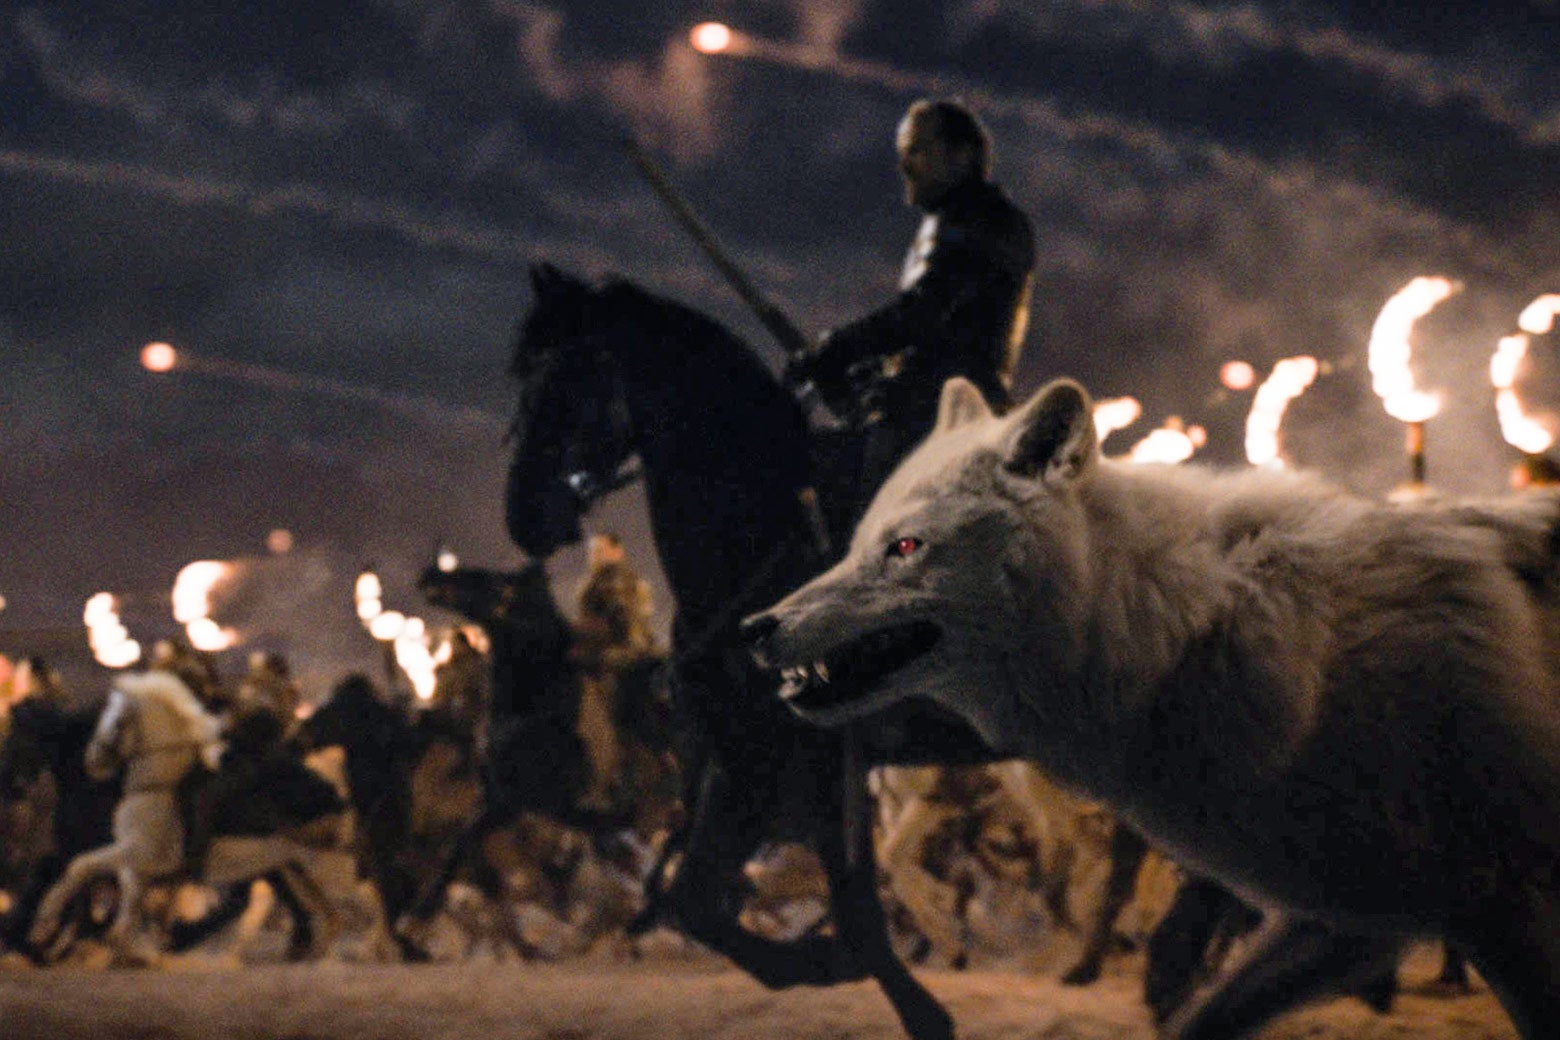 Jorah Mormont and Ghost ride into battle.